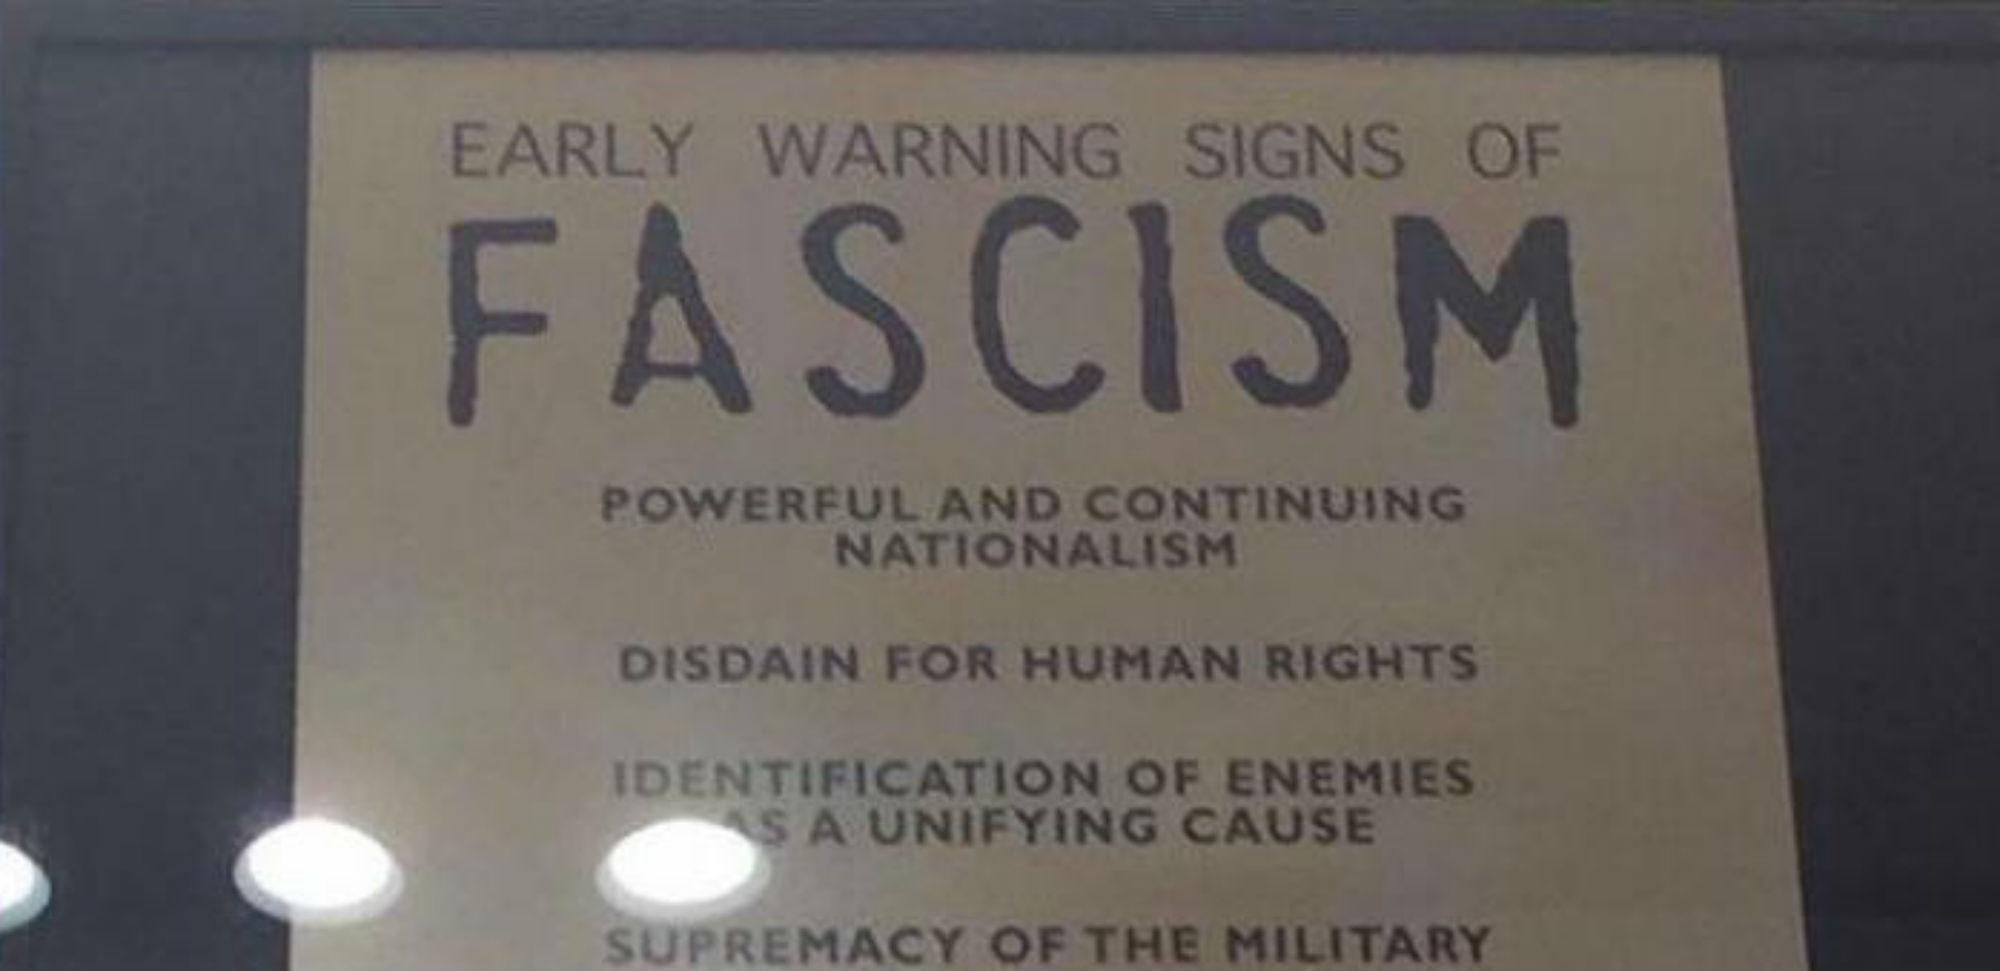 This list of 14 early warning signs of fascism is chilling | indy1002000 x 971